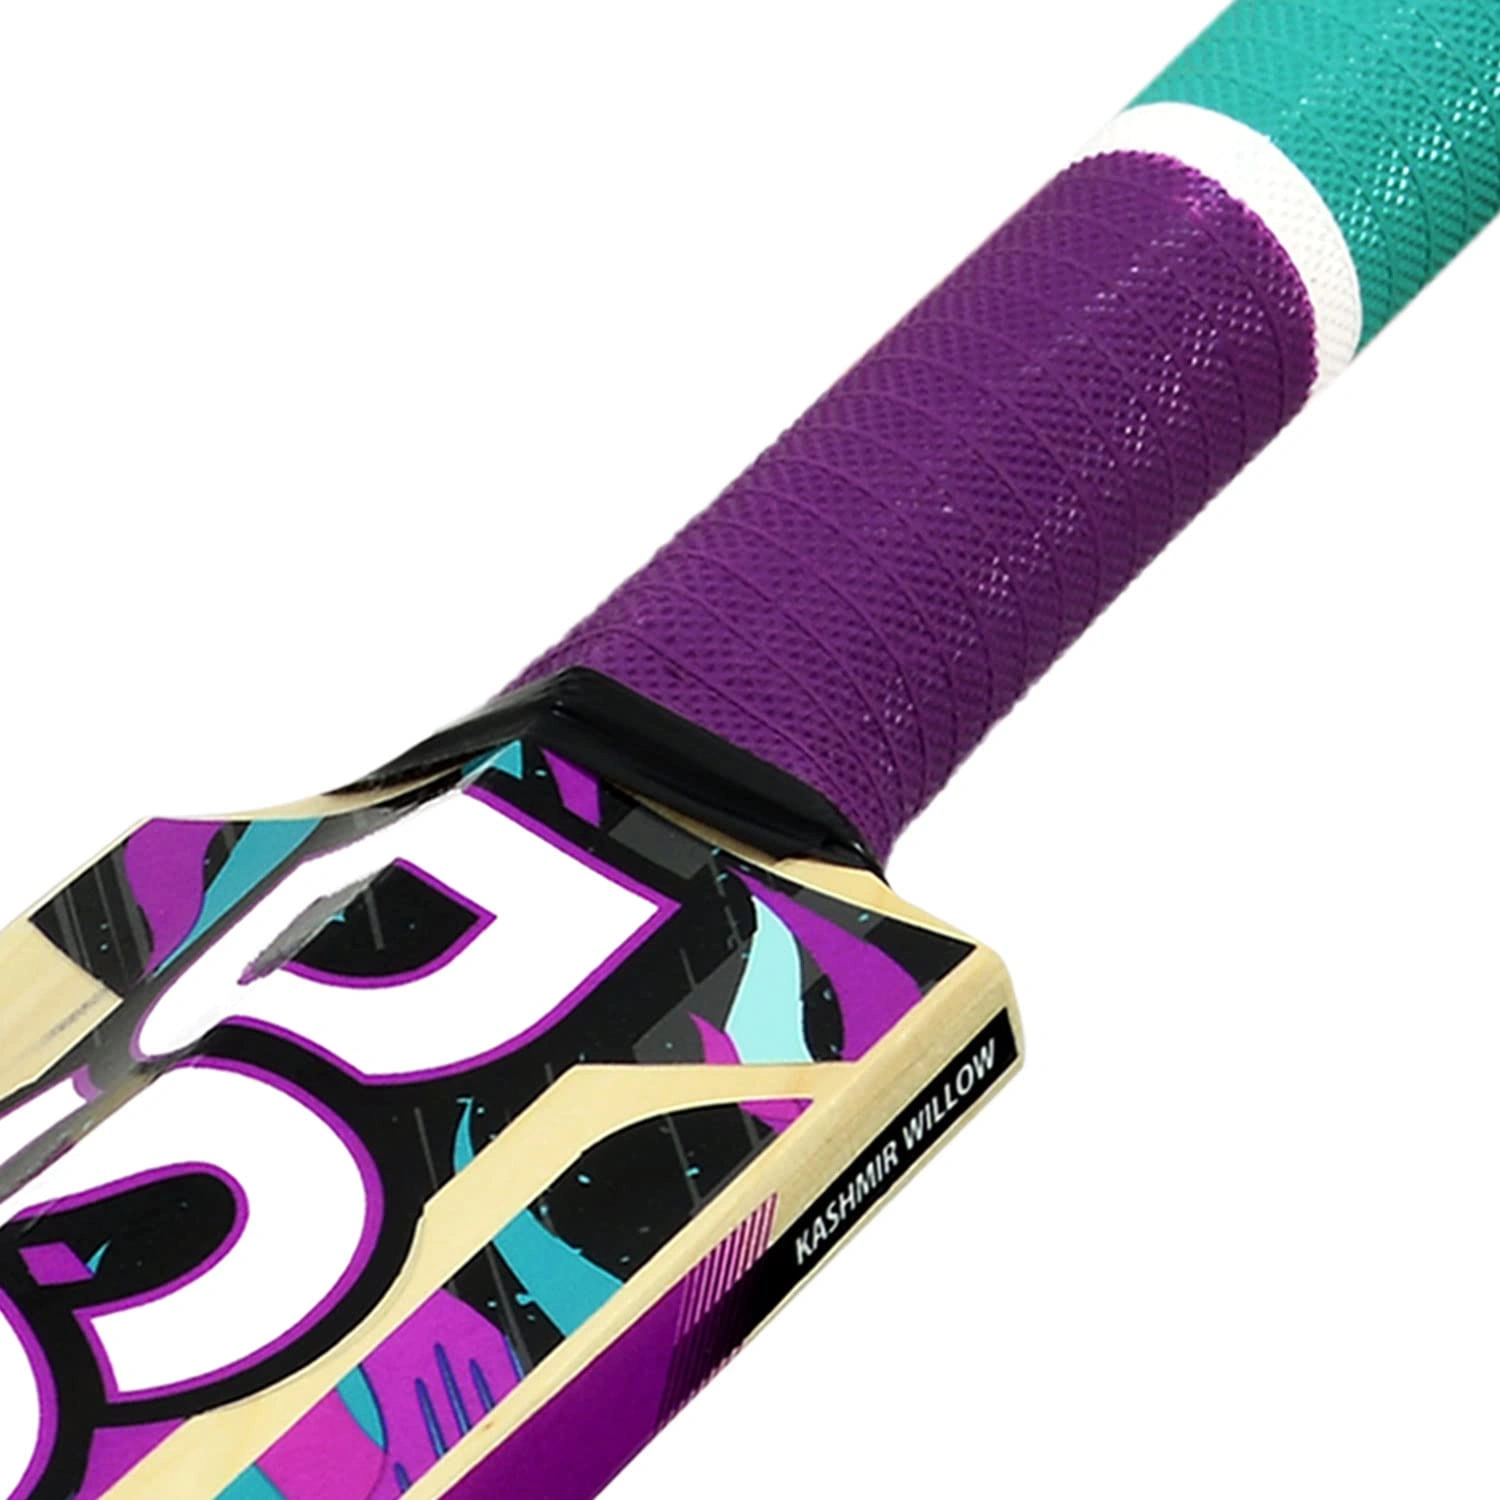 DSC Wildfire Ember Kashmir Willow Cricket Bat: Affordable and High-Performing Cricket Bat for Tennis Ball Cricket-FS-3